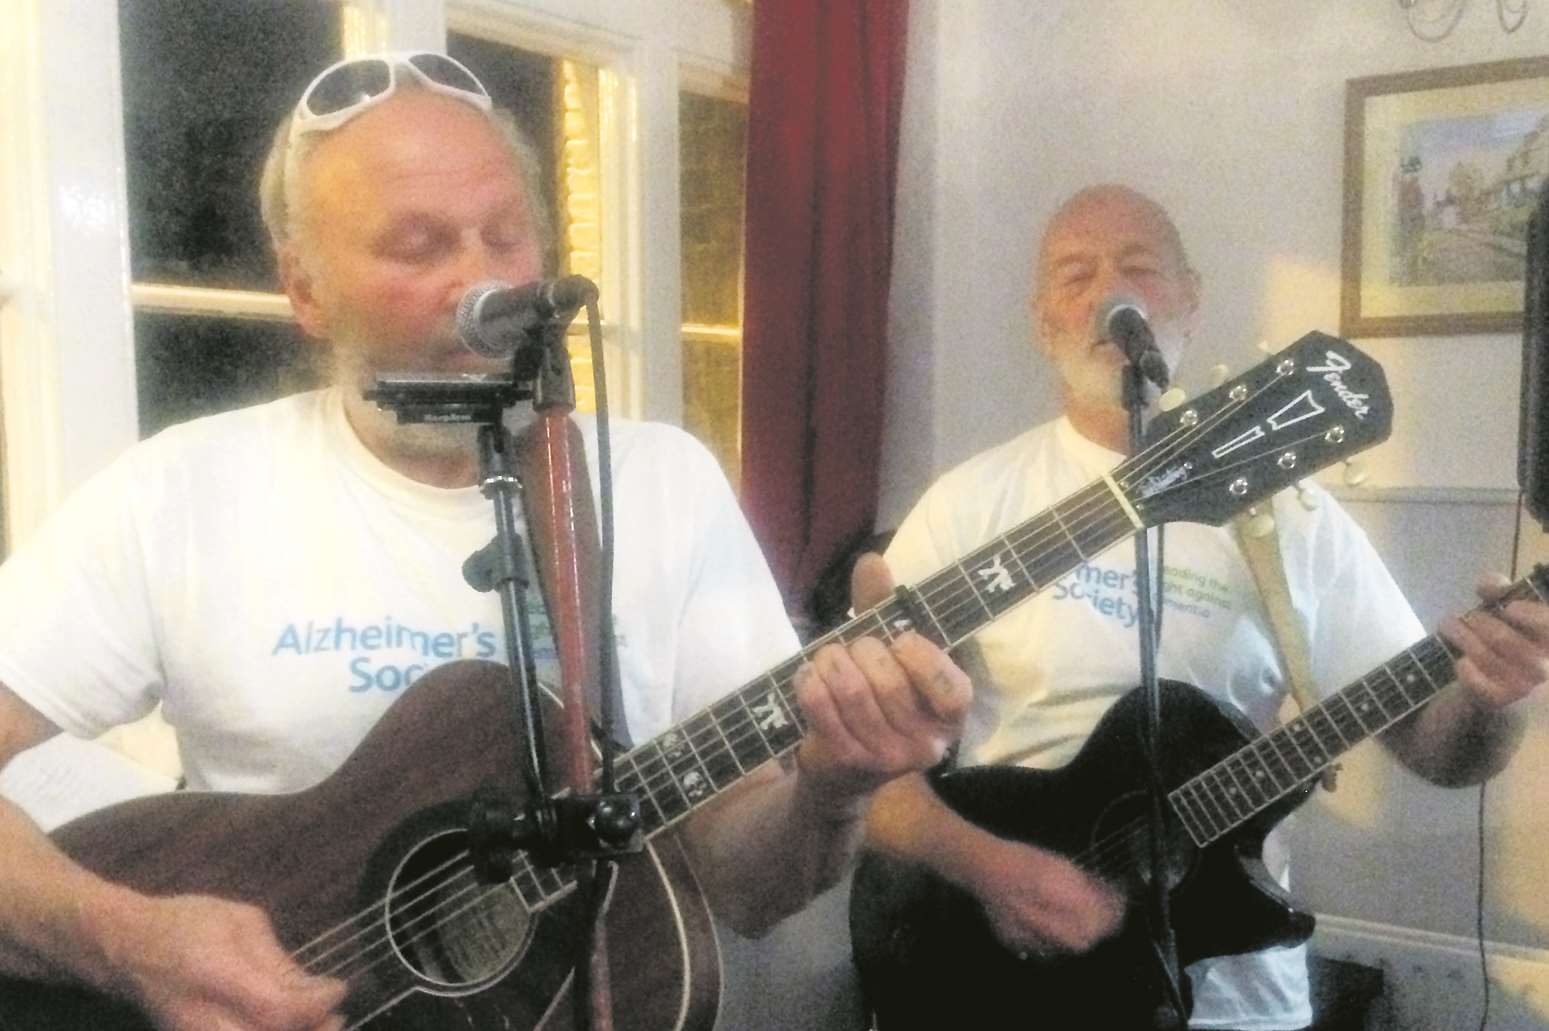 The duo at the Kings Arms, in Upnor